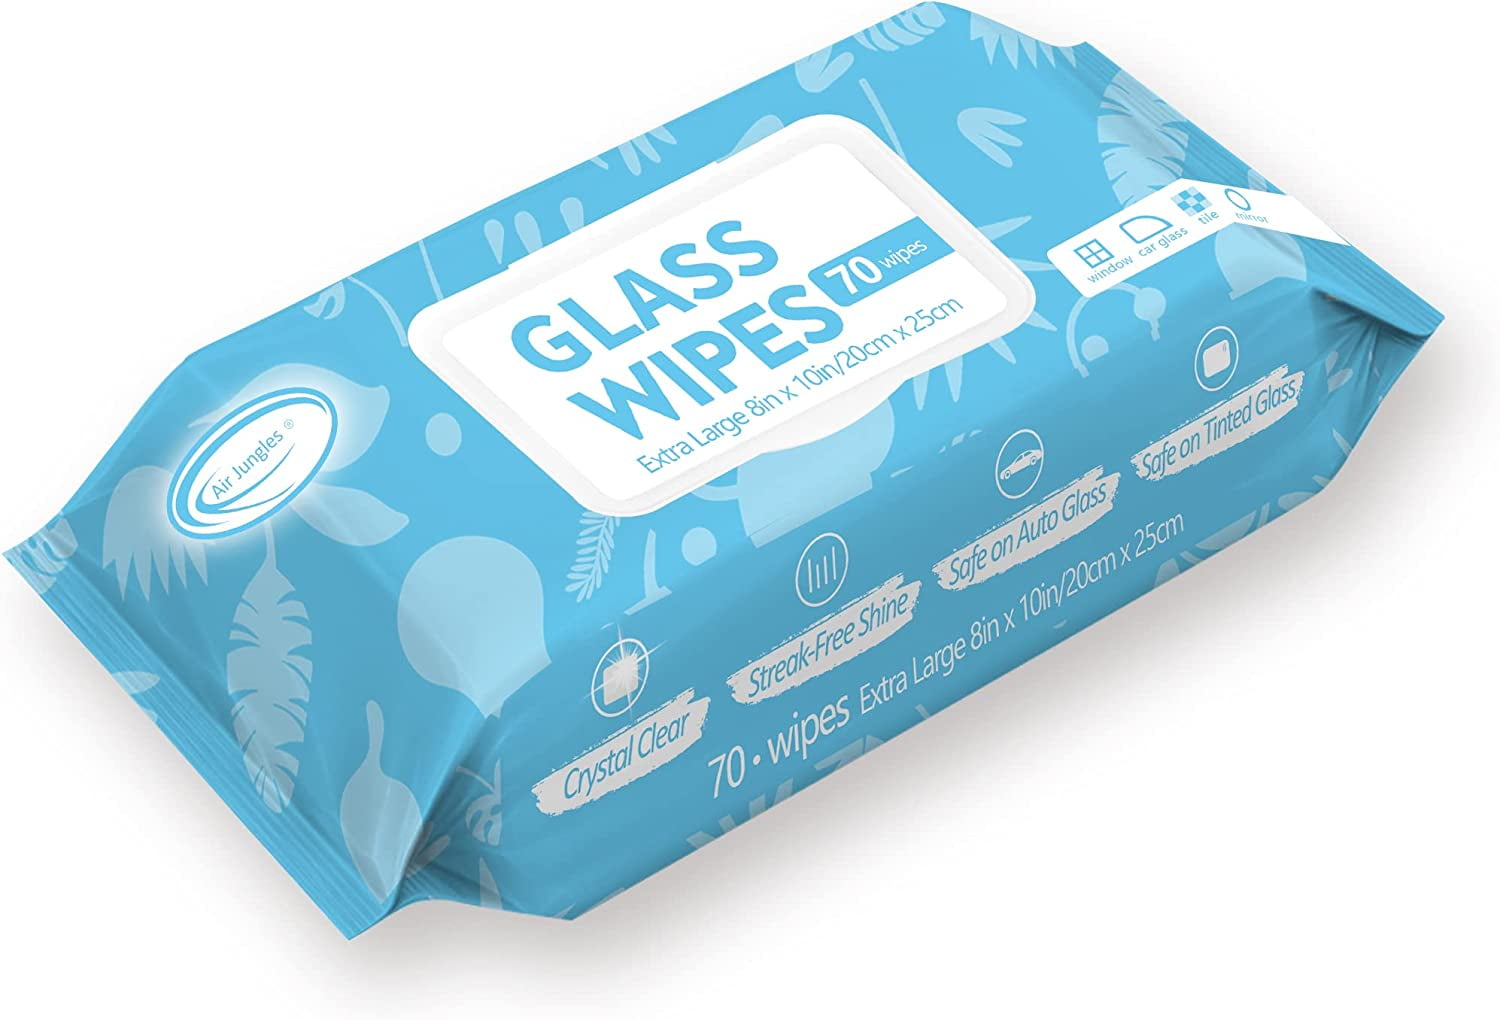 Luxury Driver 24 Pack Glass Flat Wipes at Theisens